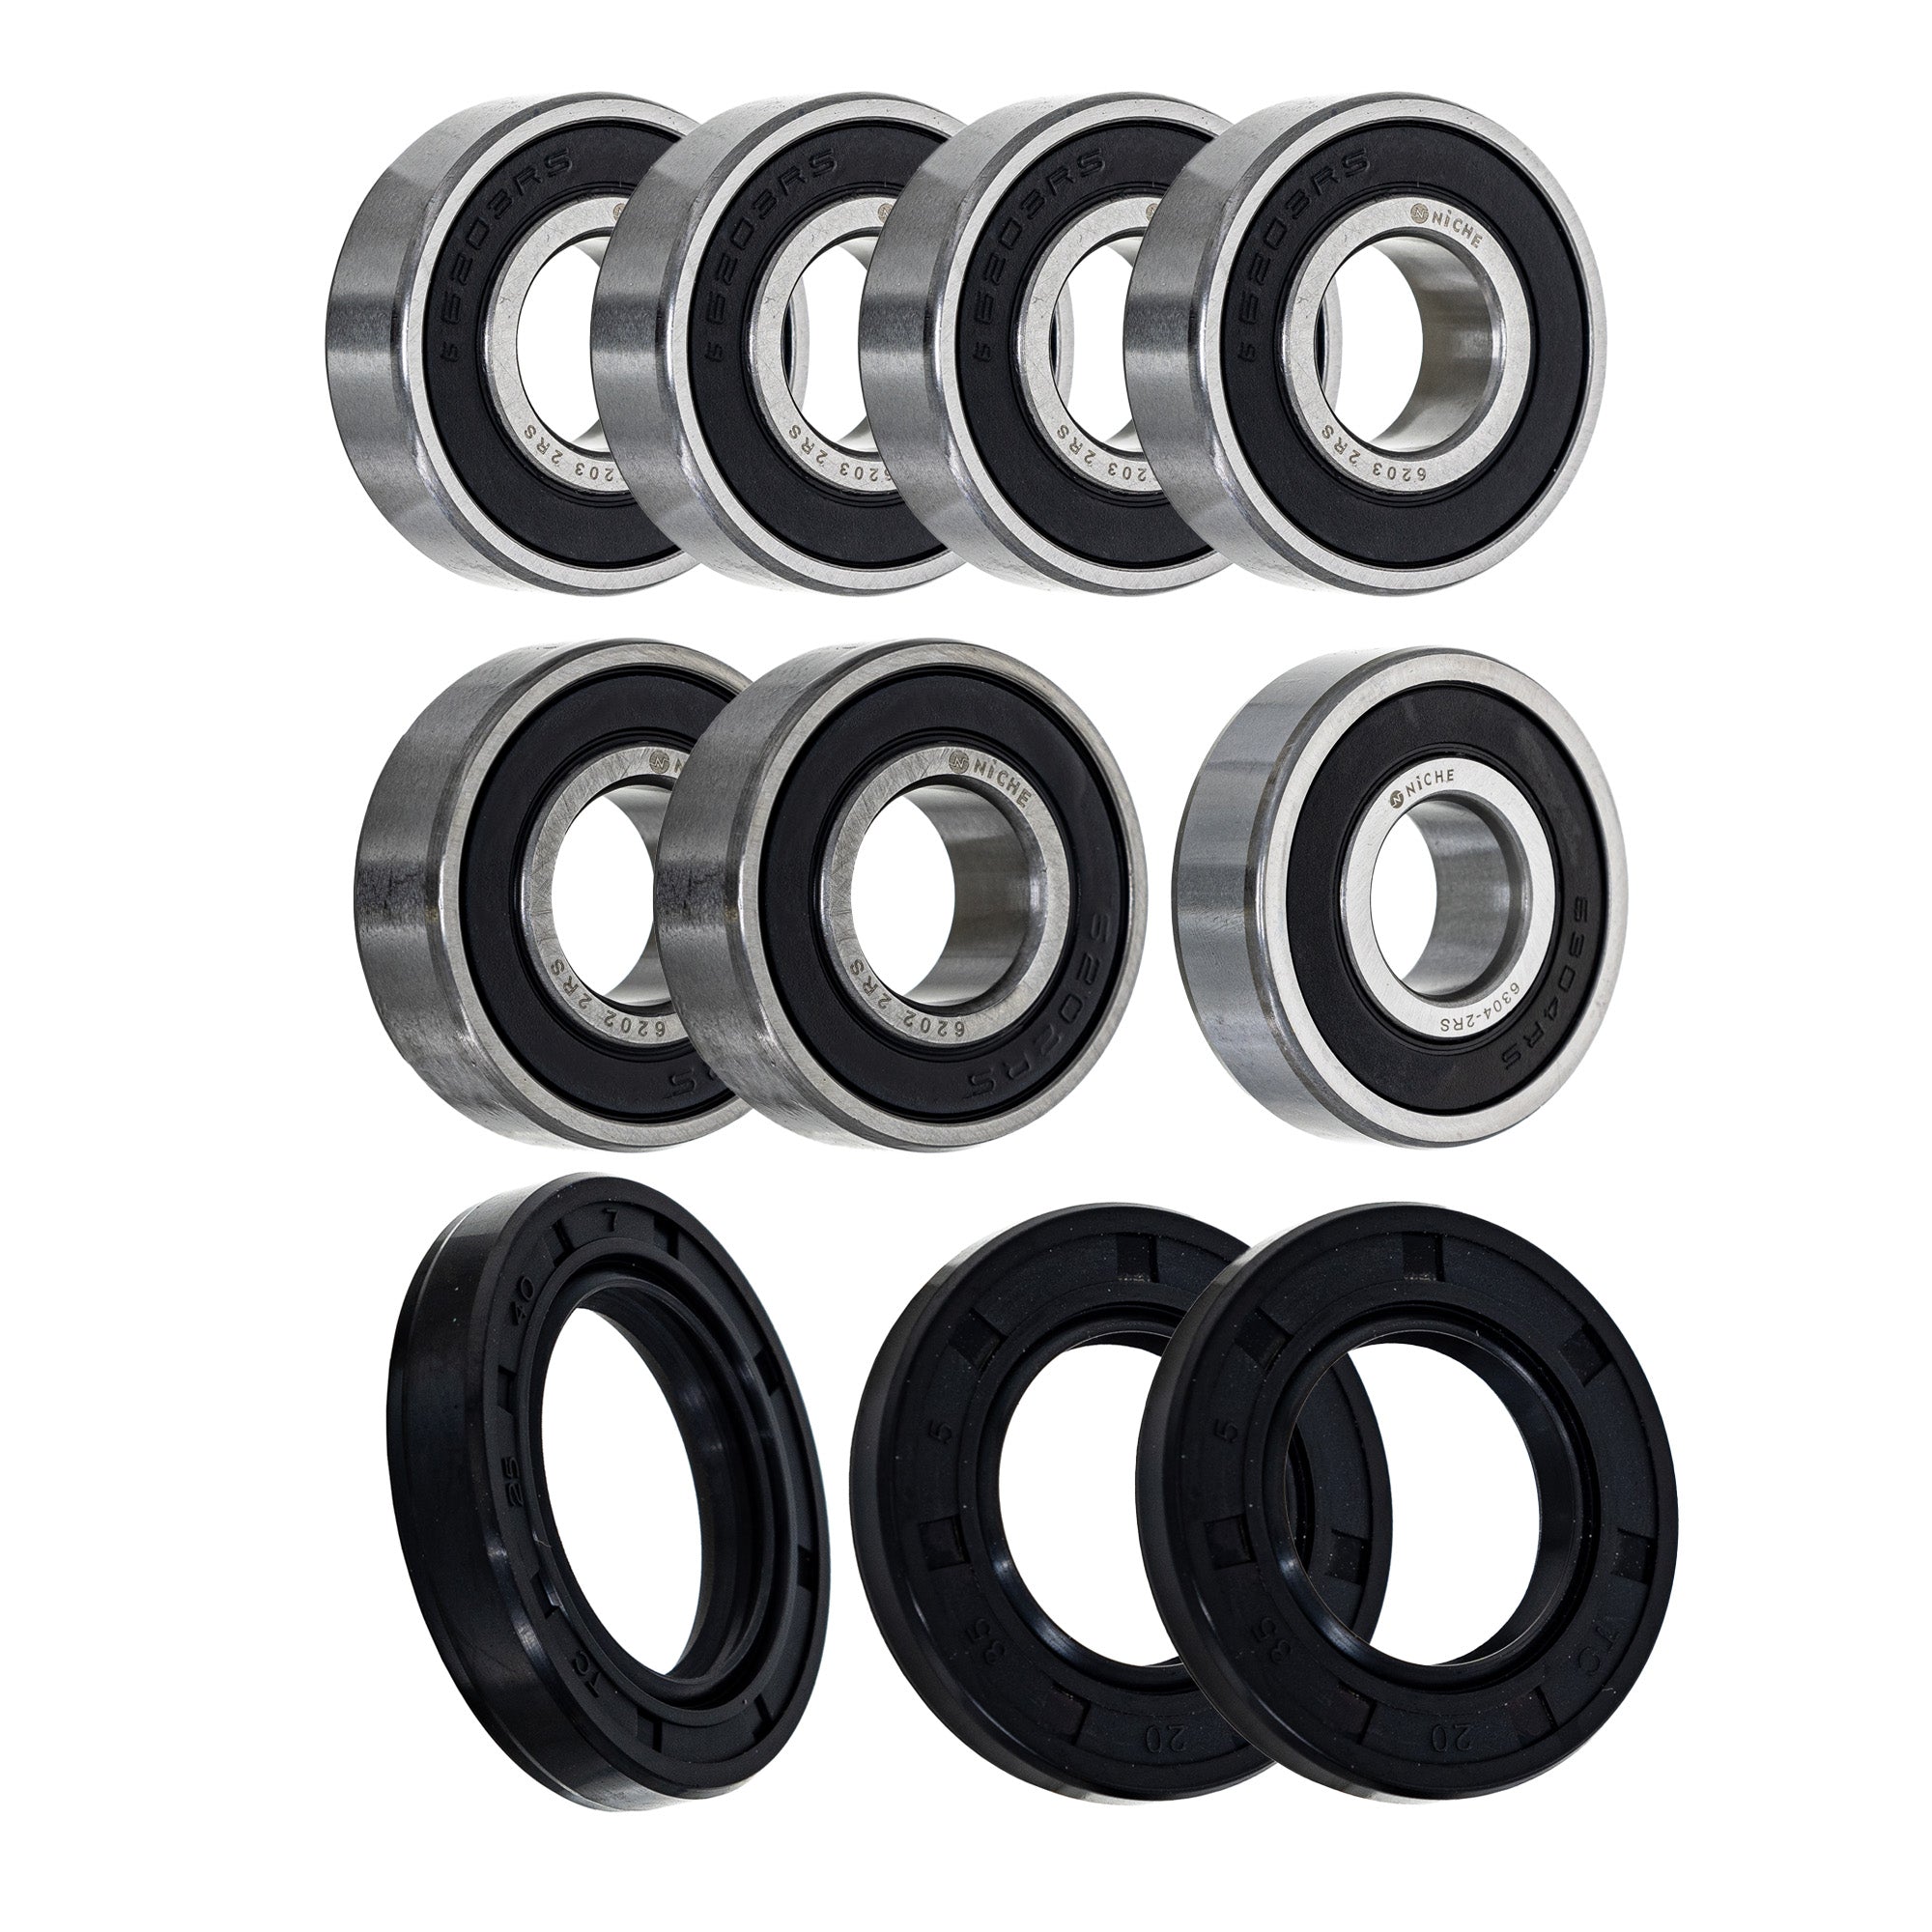 Wheel Bearing Seal Kit for zOTHER Ref No XT600 NICHE MK1008727